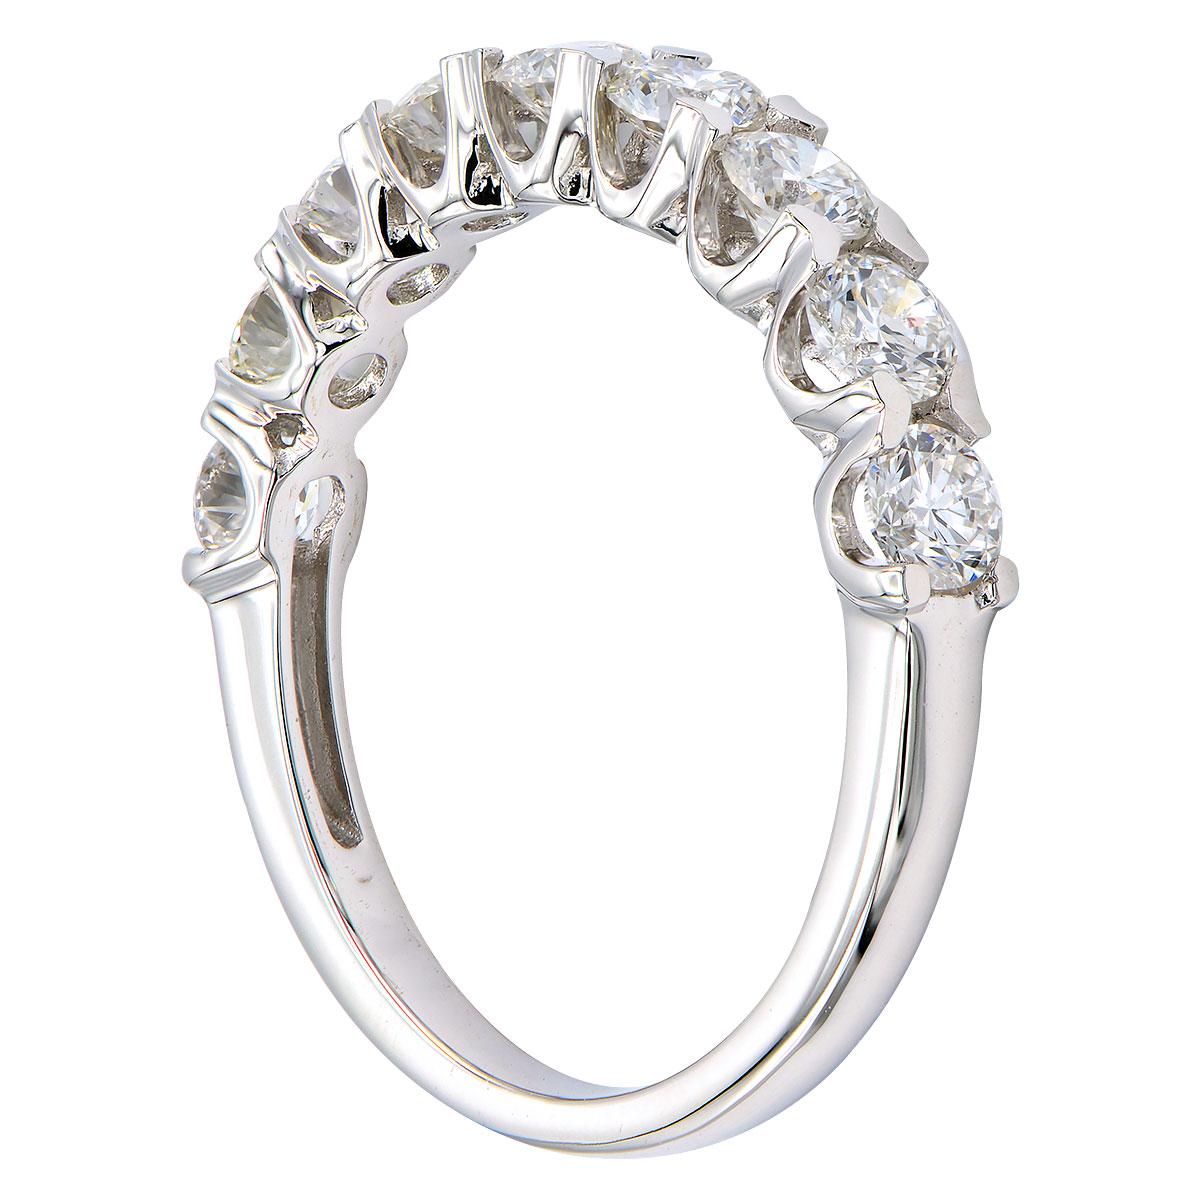 This classic stunning band has 9 round VS2, G color diamonds totaling 1.09 carats that go halfway around the band. They are secured with gorgeous prongs that add design detail to the sides of the ring. This ring is made from 2.3 grams of 18 karat